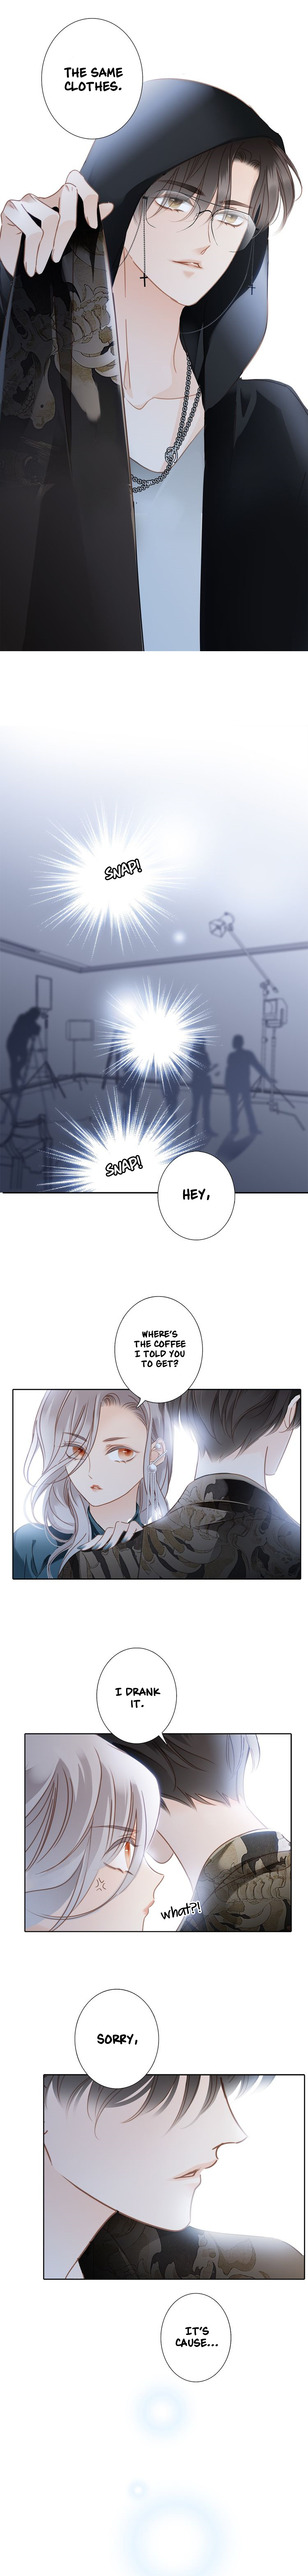 1St Kiss - Page 4